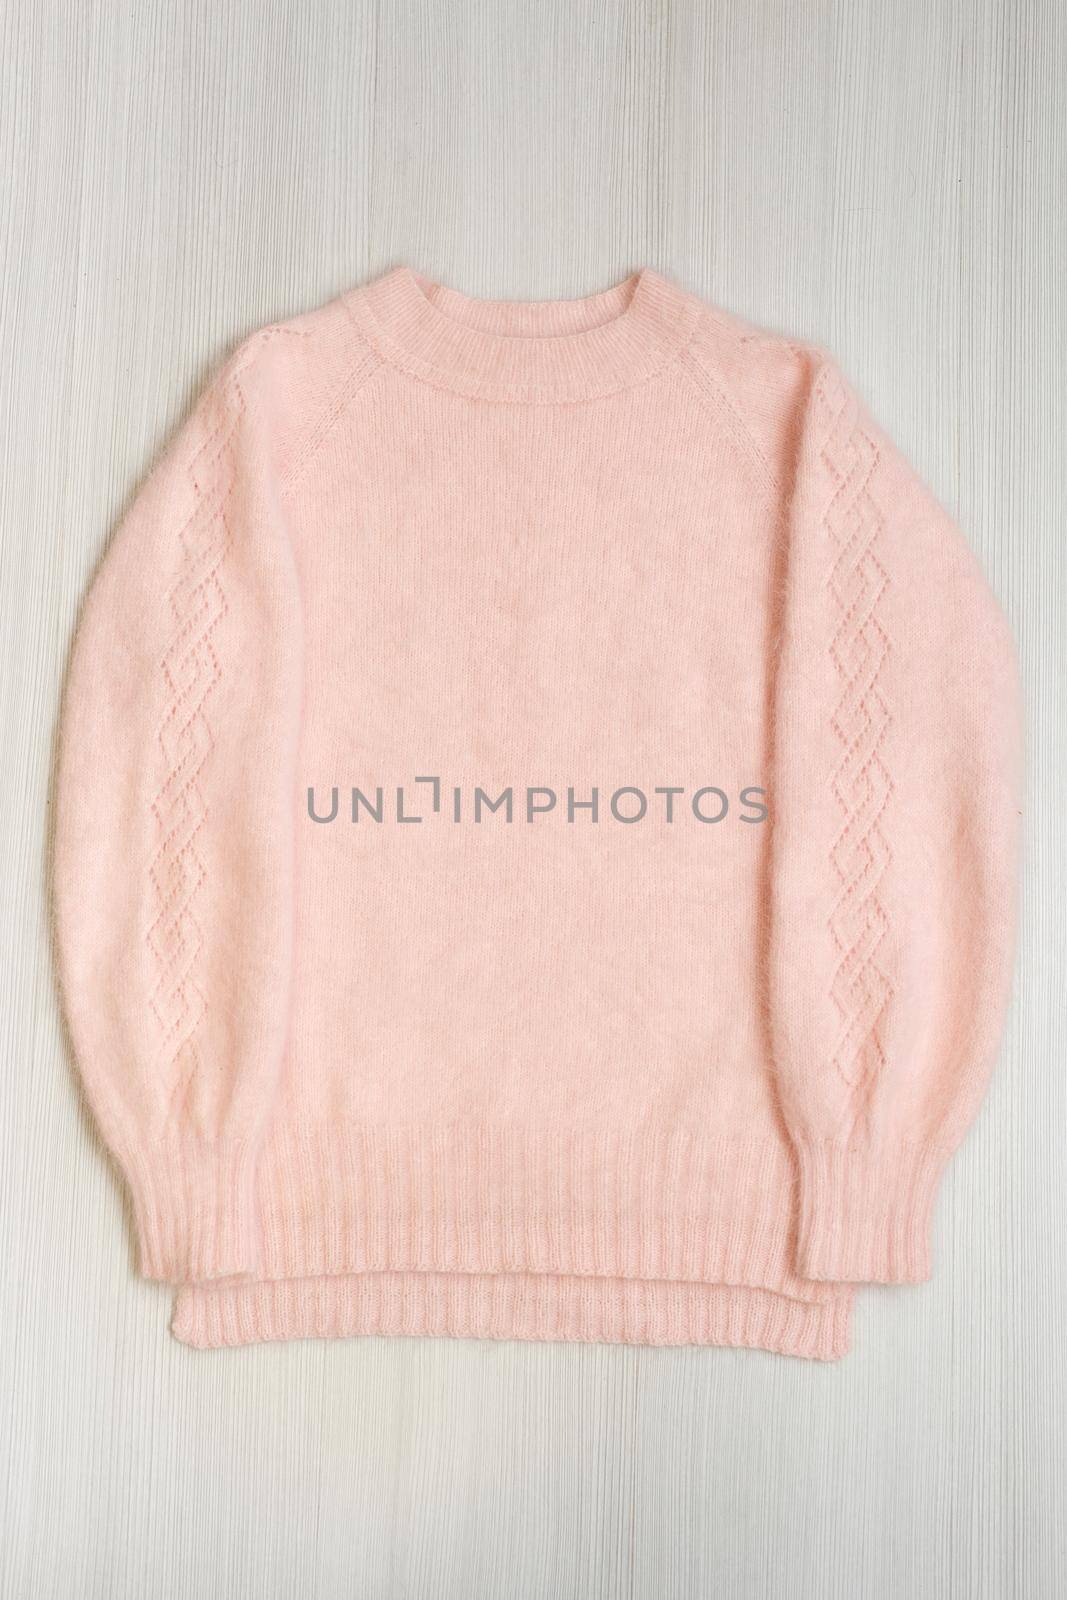 Knitted women's sweater on a white background. by StudioPeace